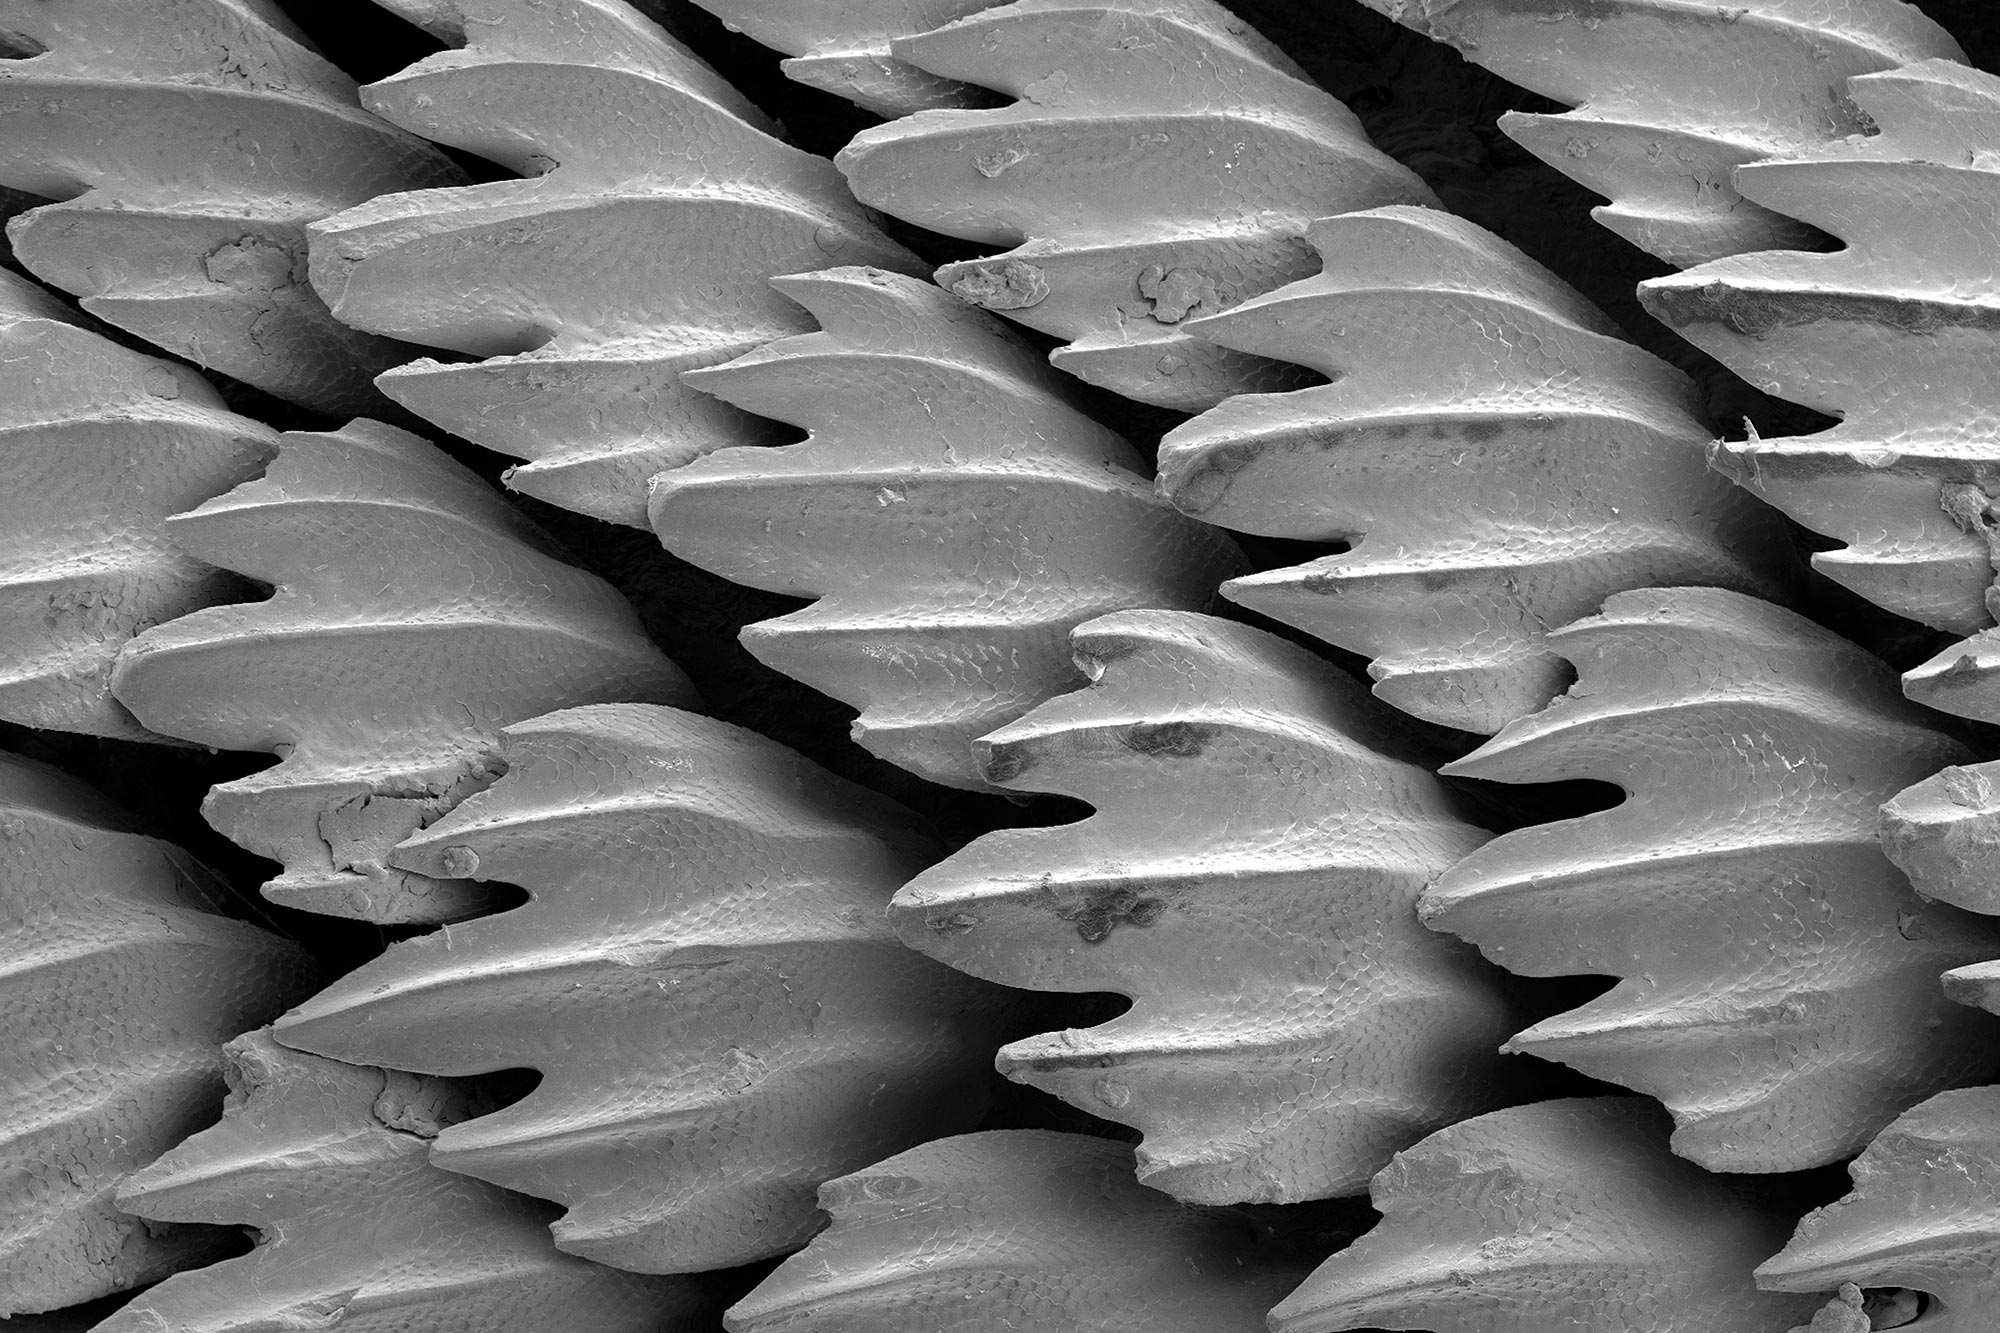 Ocean Acidification From Climate Change Is Damaging Shark Scales - SciTechDaily